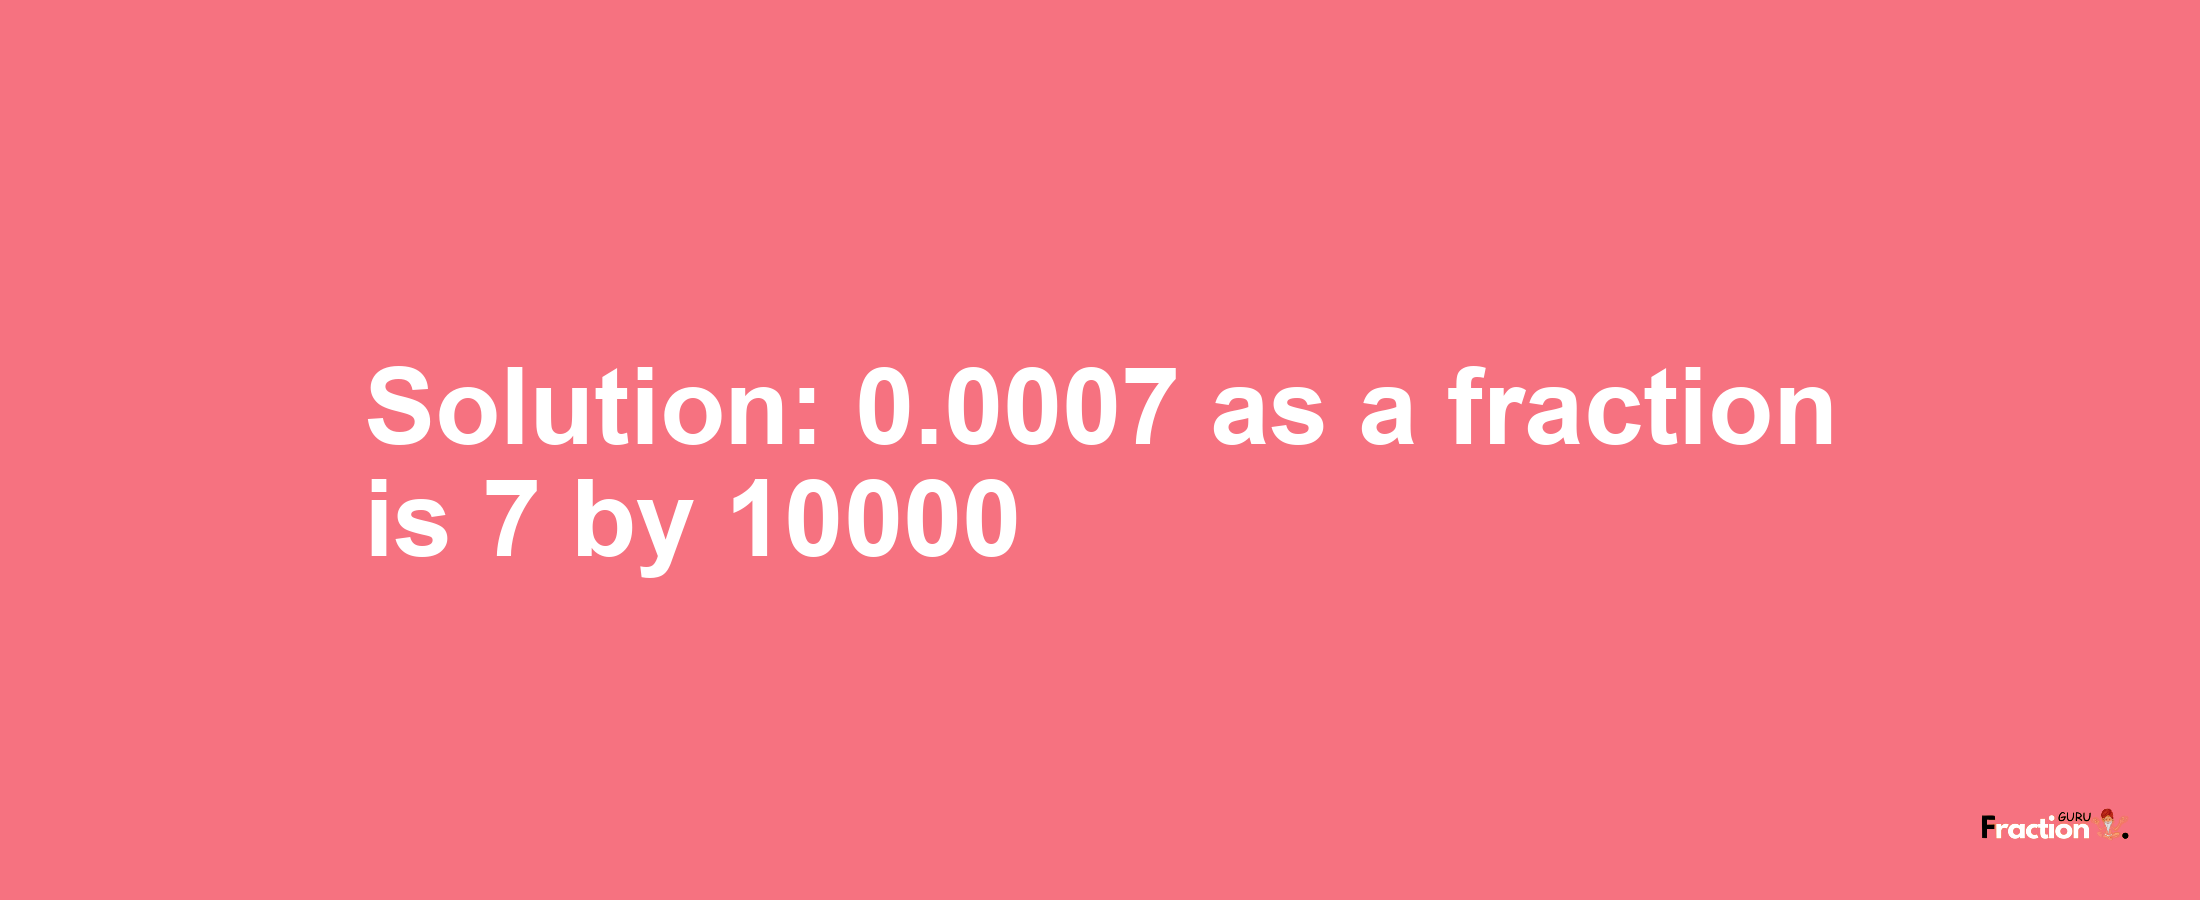 Solution:0.0007 as a fraction is 7/10000